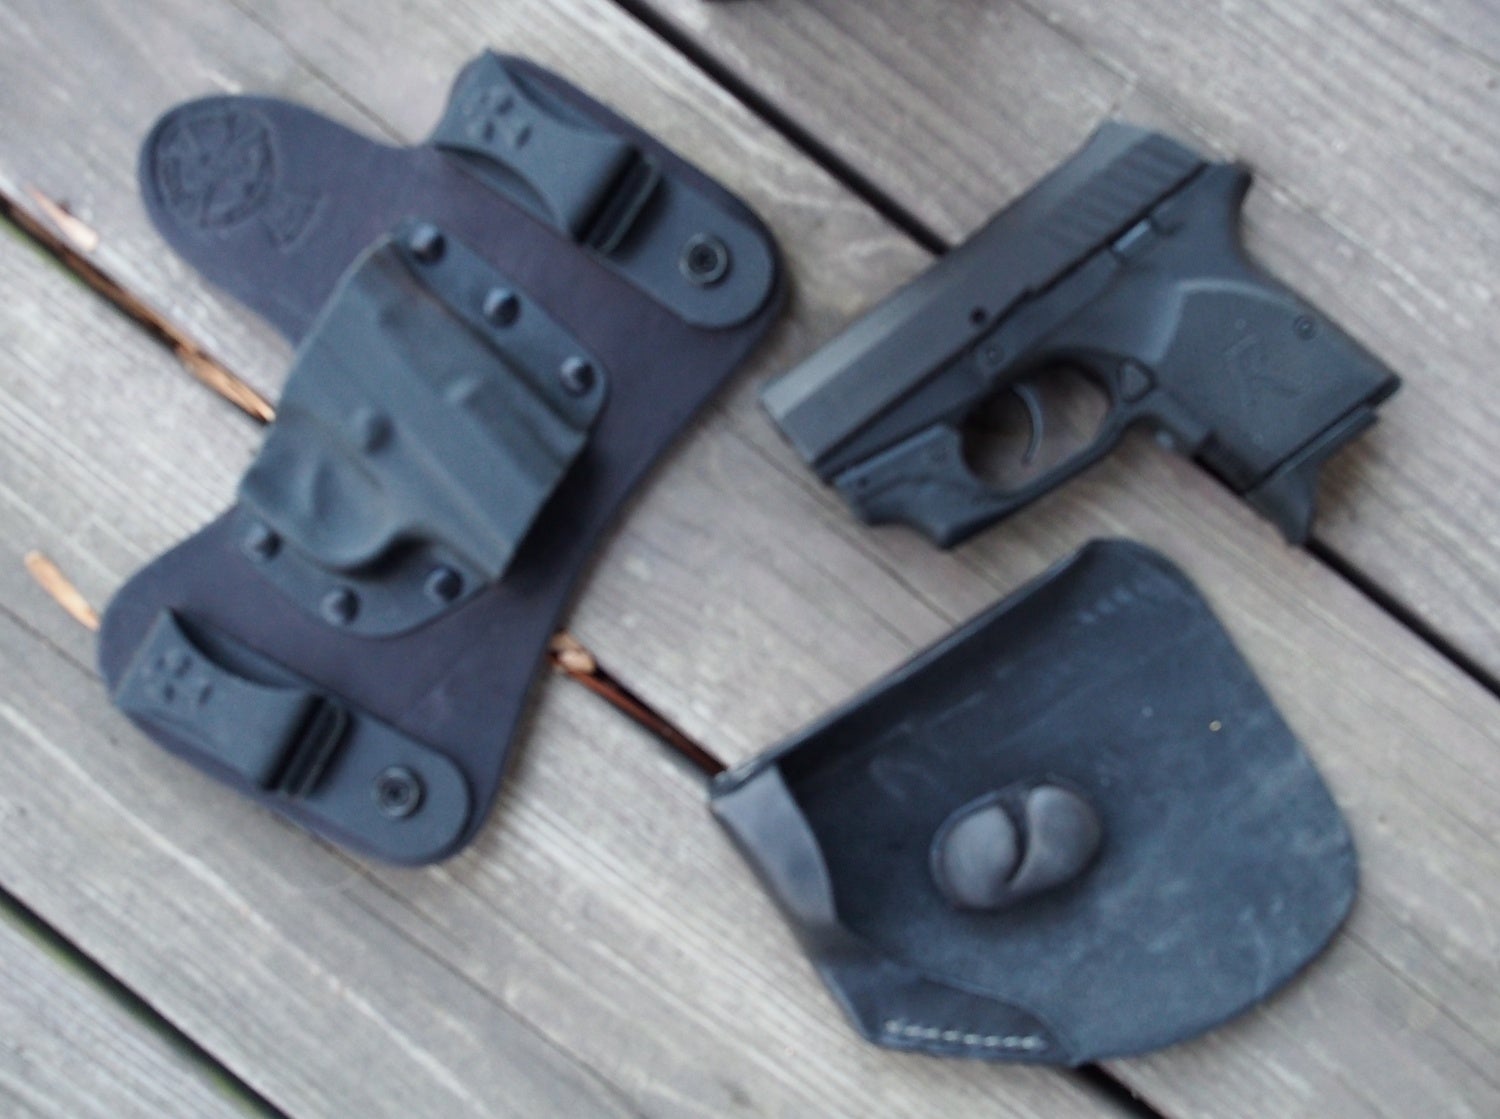 The RM380 with the CrossBreed and Recluse holsters